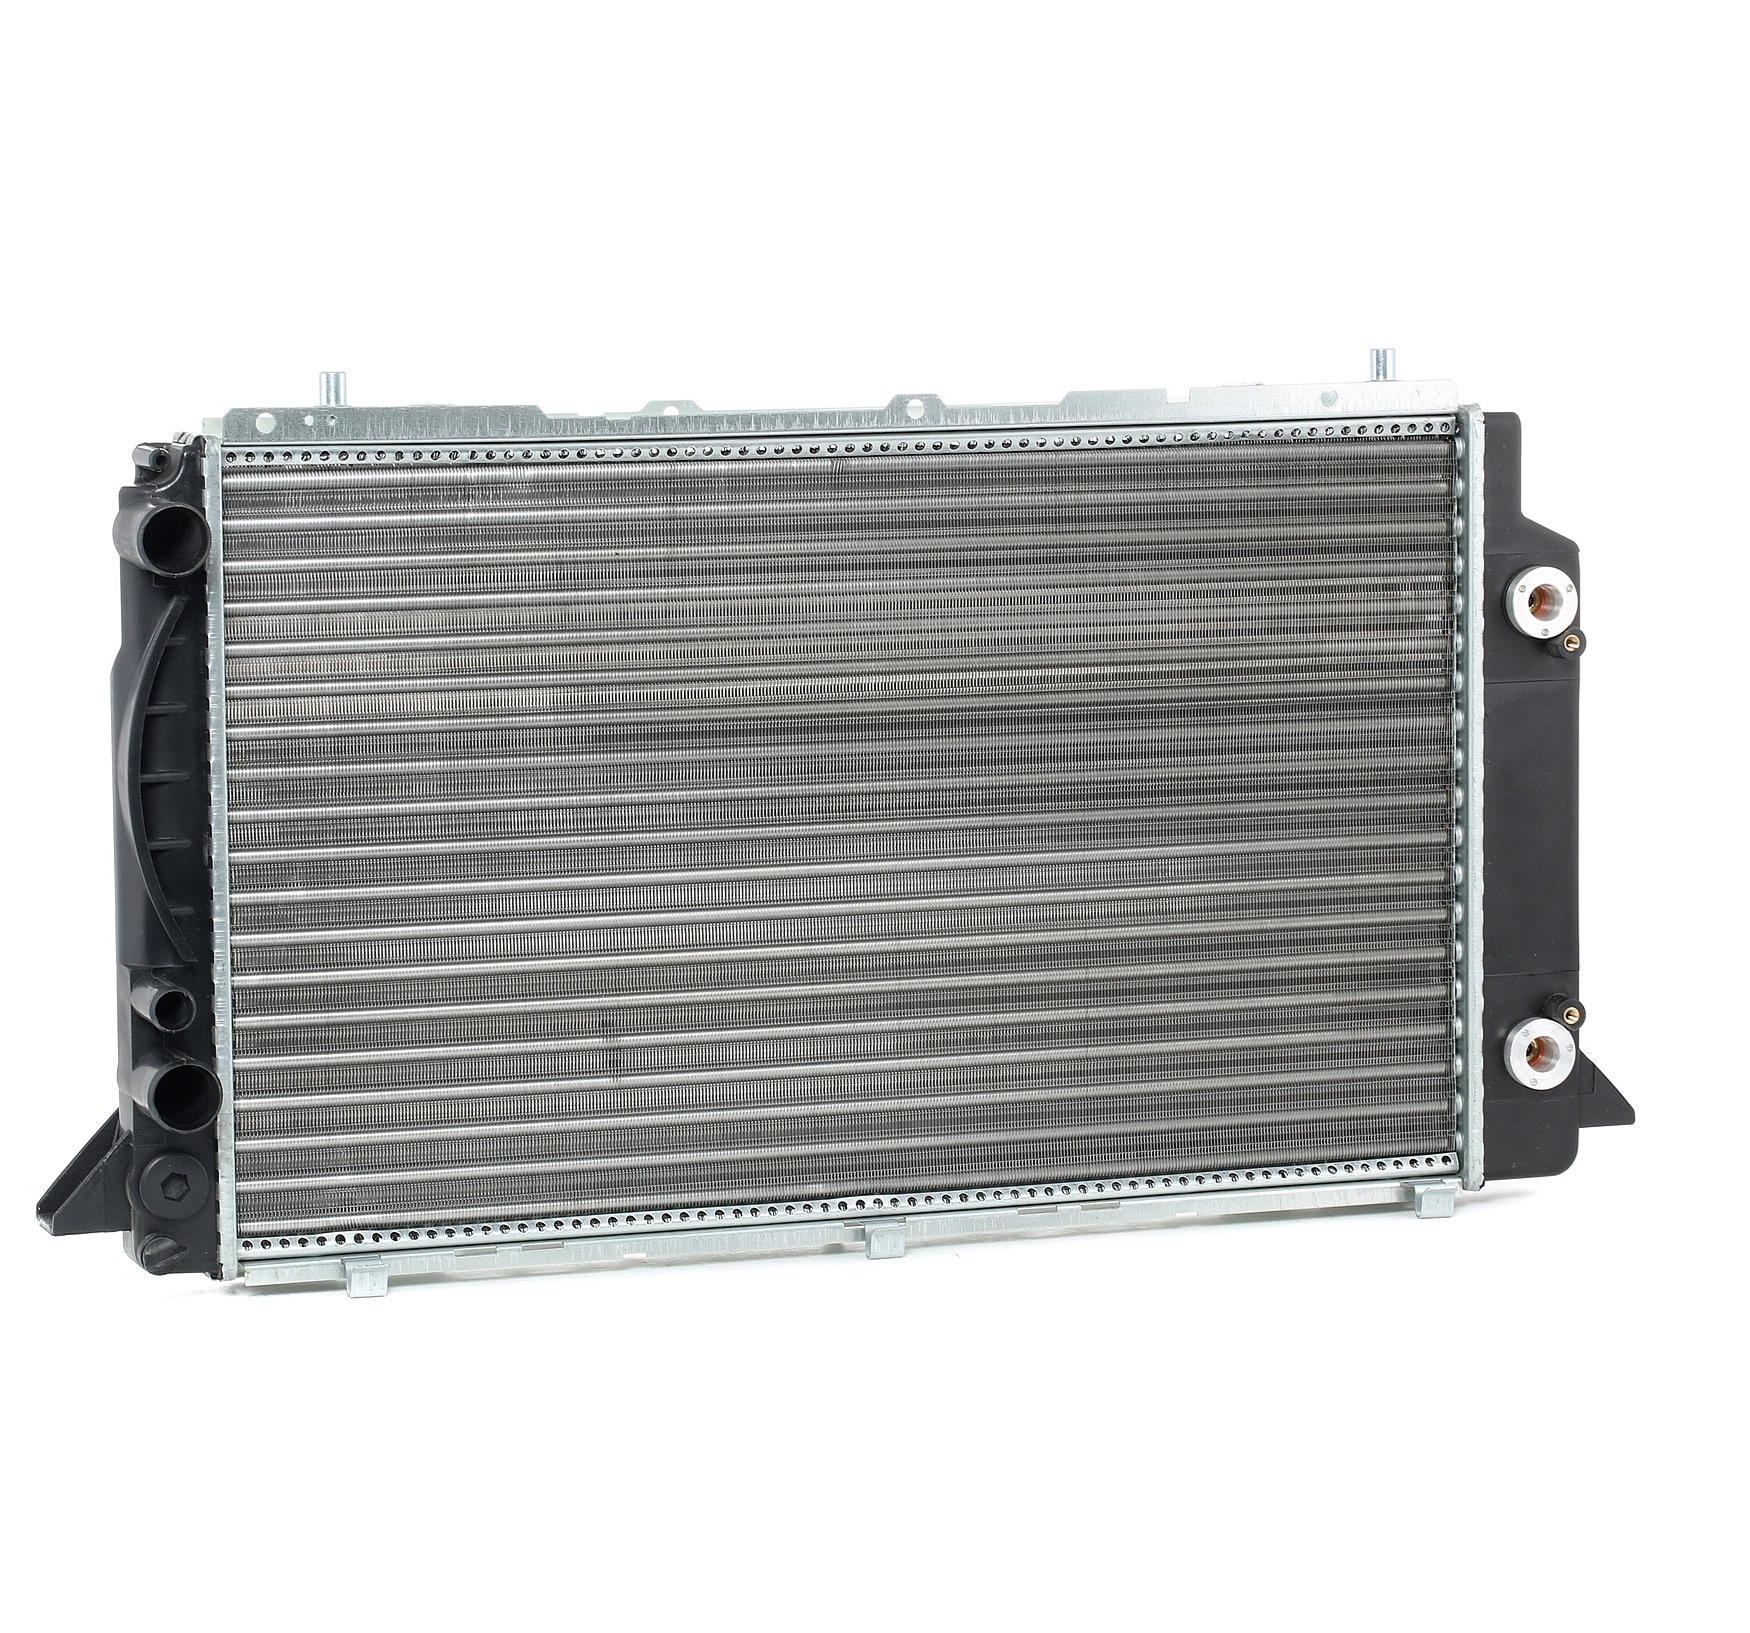 RIDEX 470R0406 Engine radiator for vehicles with/without air conditioning, 596 x 358 x 44 mm, Automatic Transmission, Brazed cooling fins